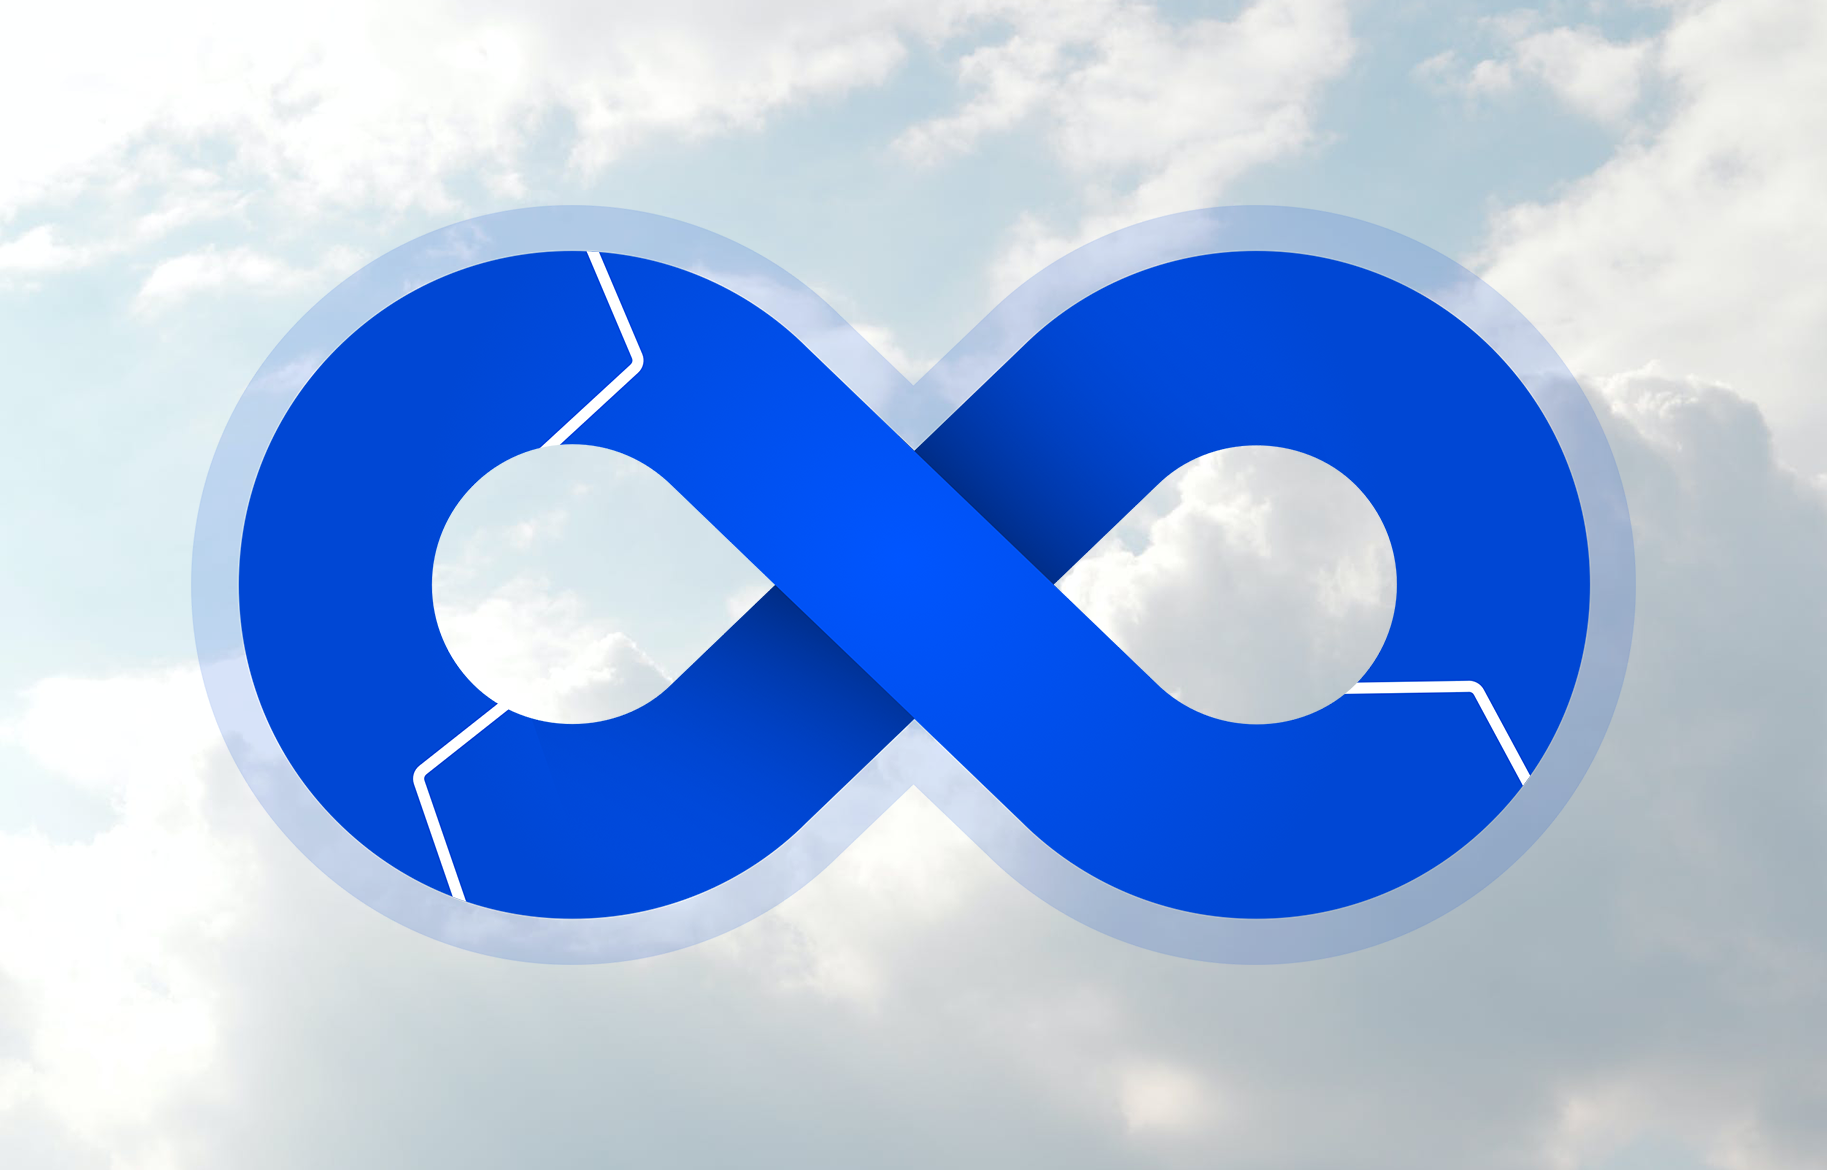 Clouds in the sky with a blue DevOps infinity symbol on top